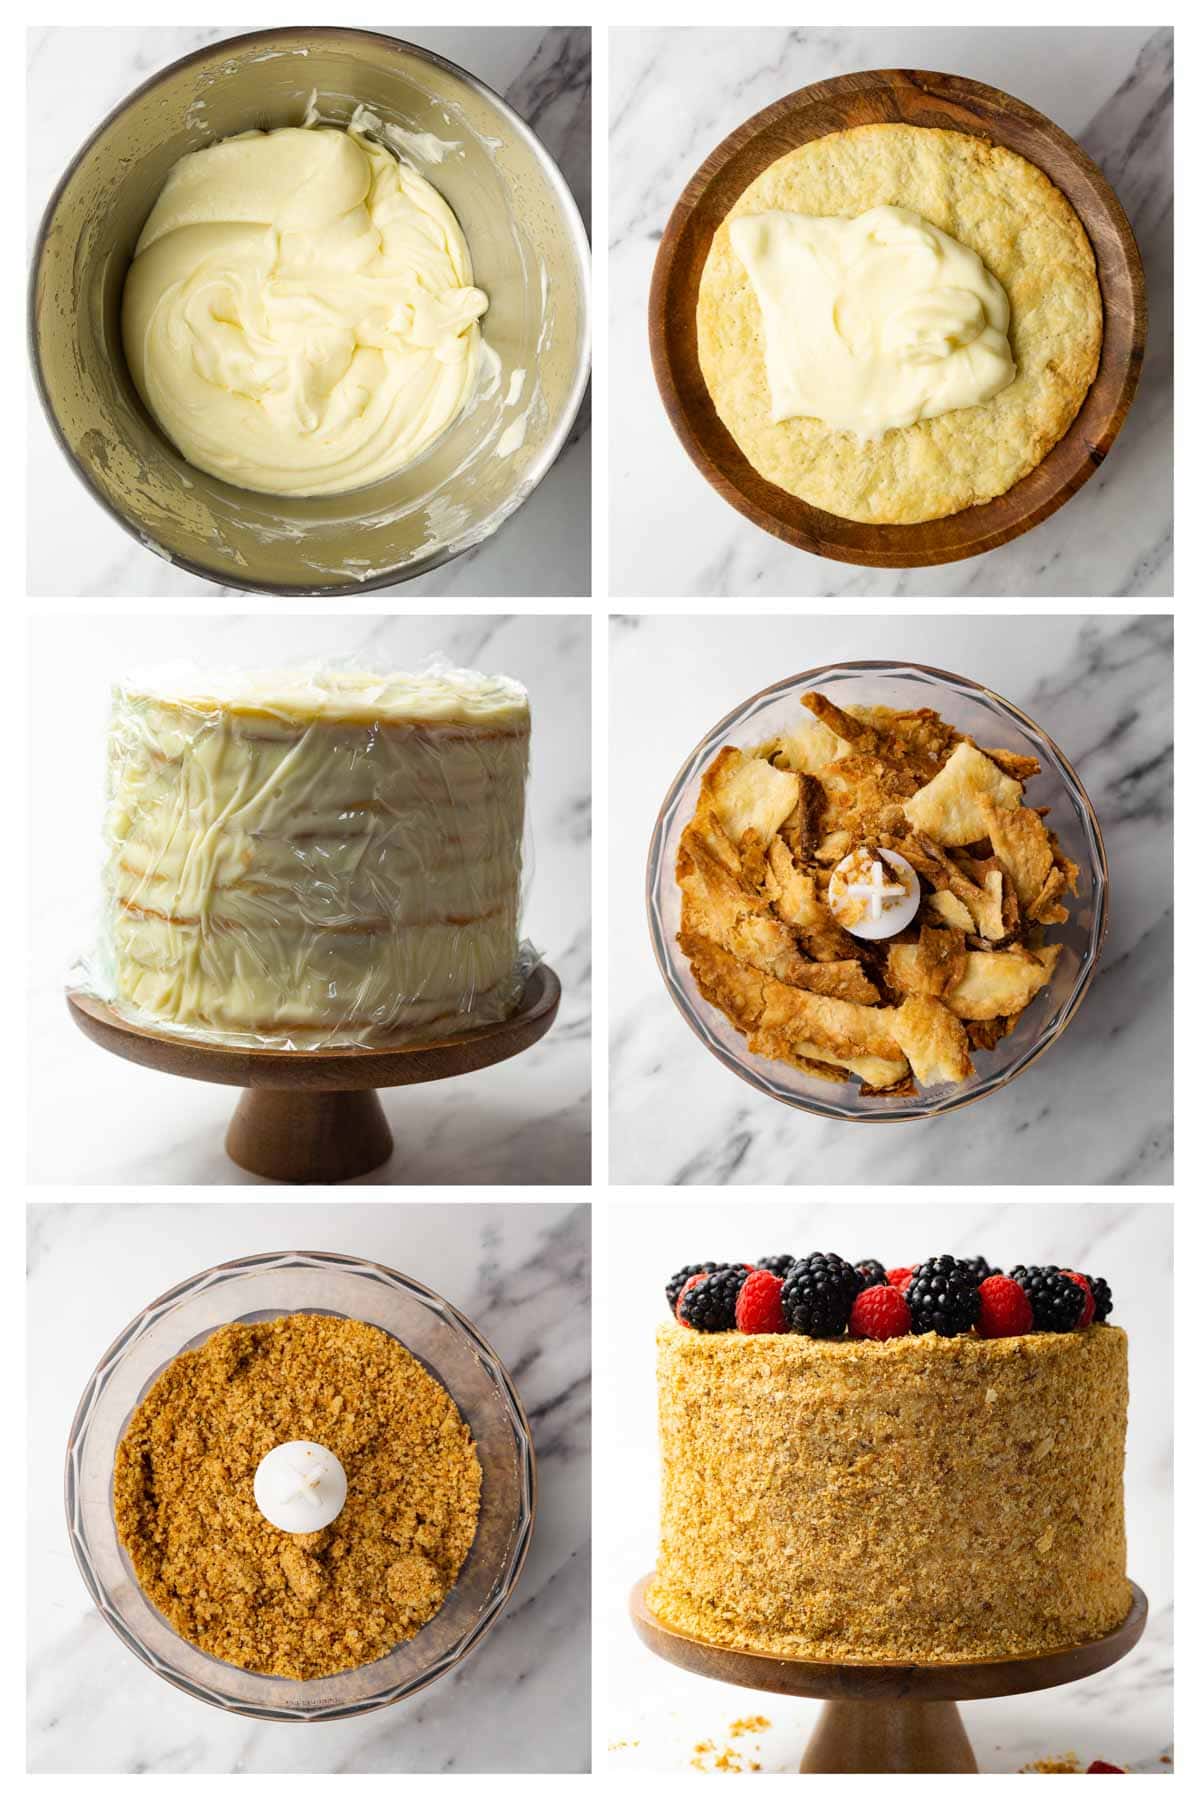 Collage image showing step by step instructions to assemble and decorate napoleon cake.